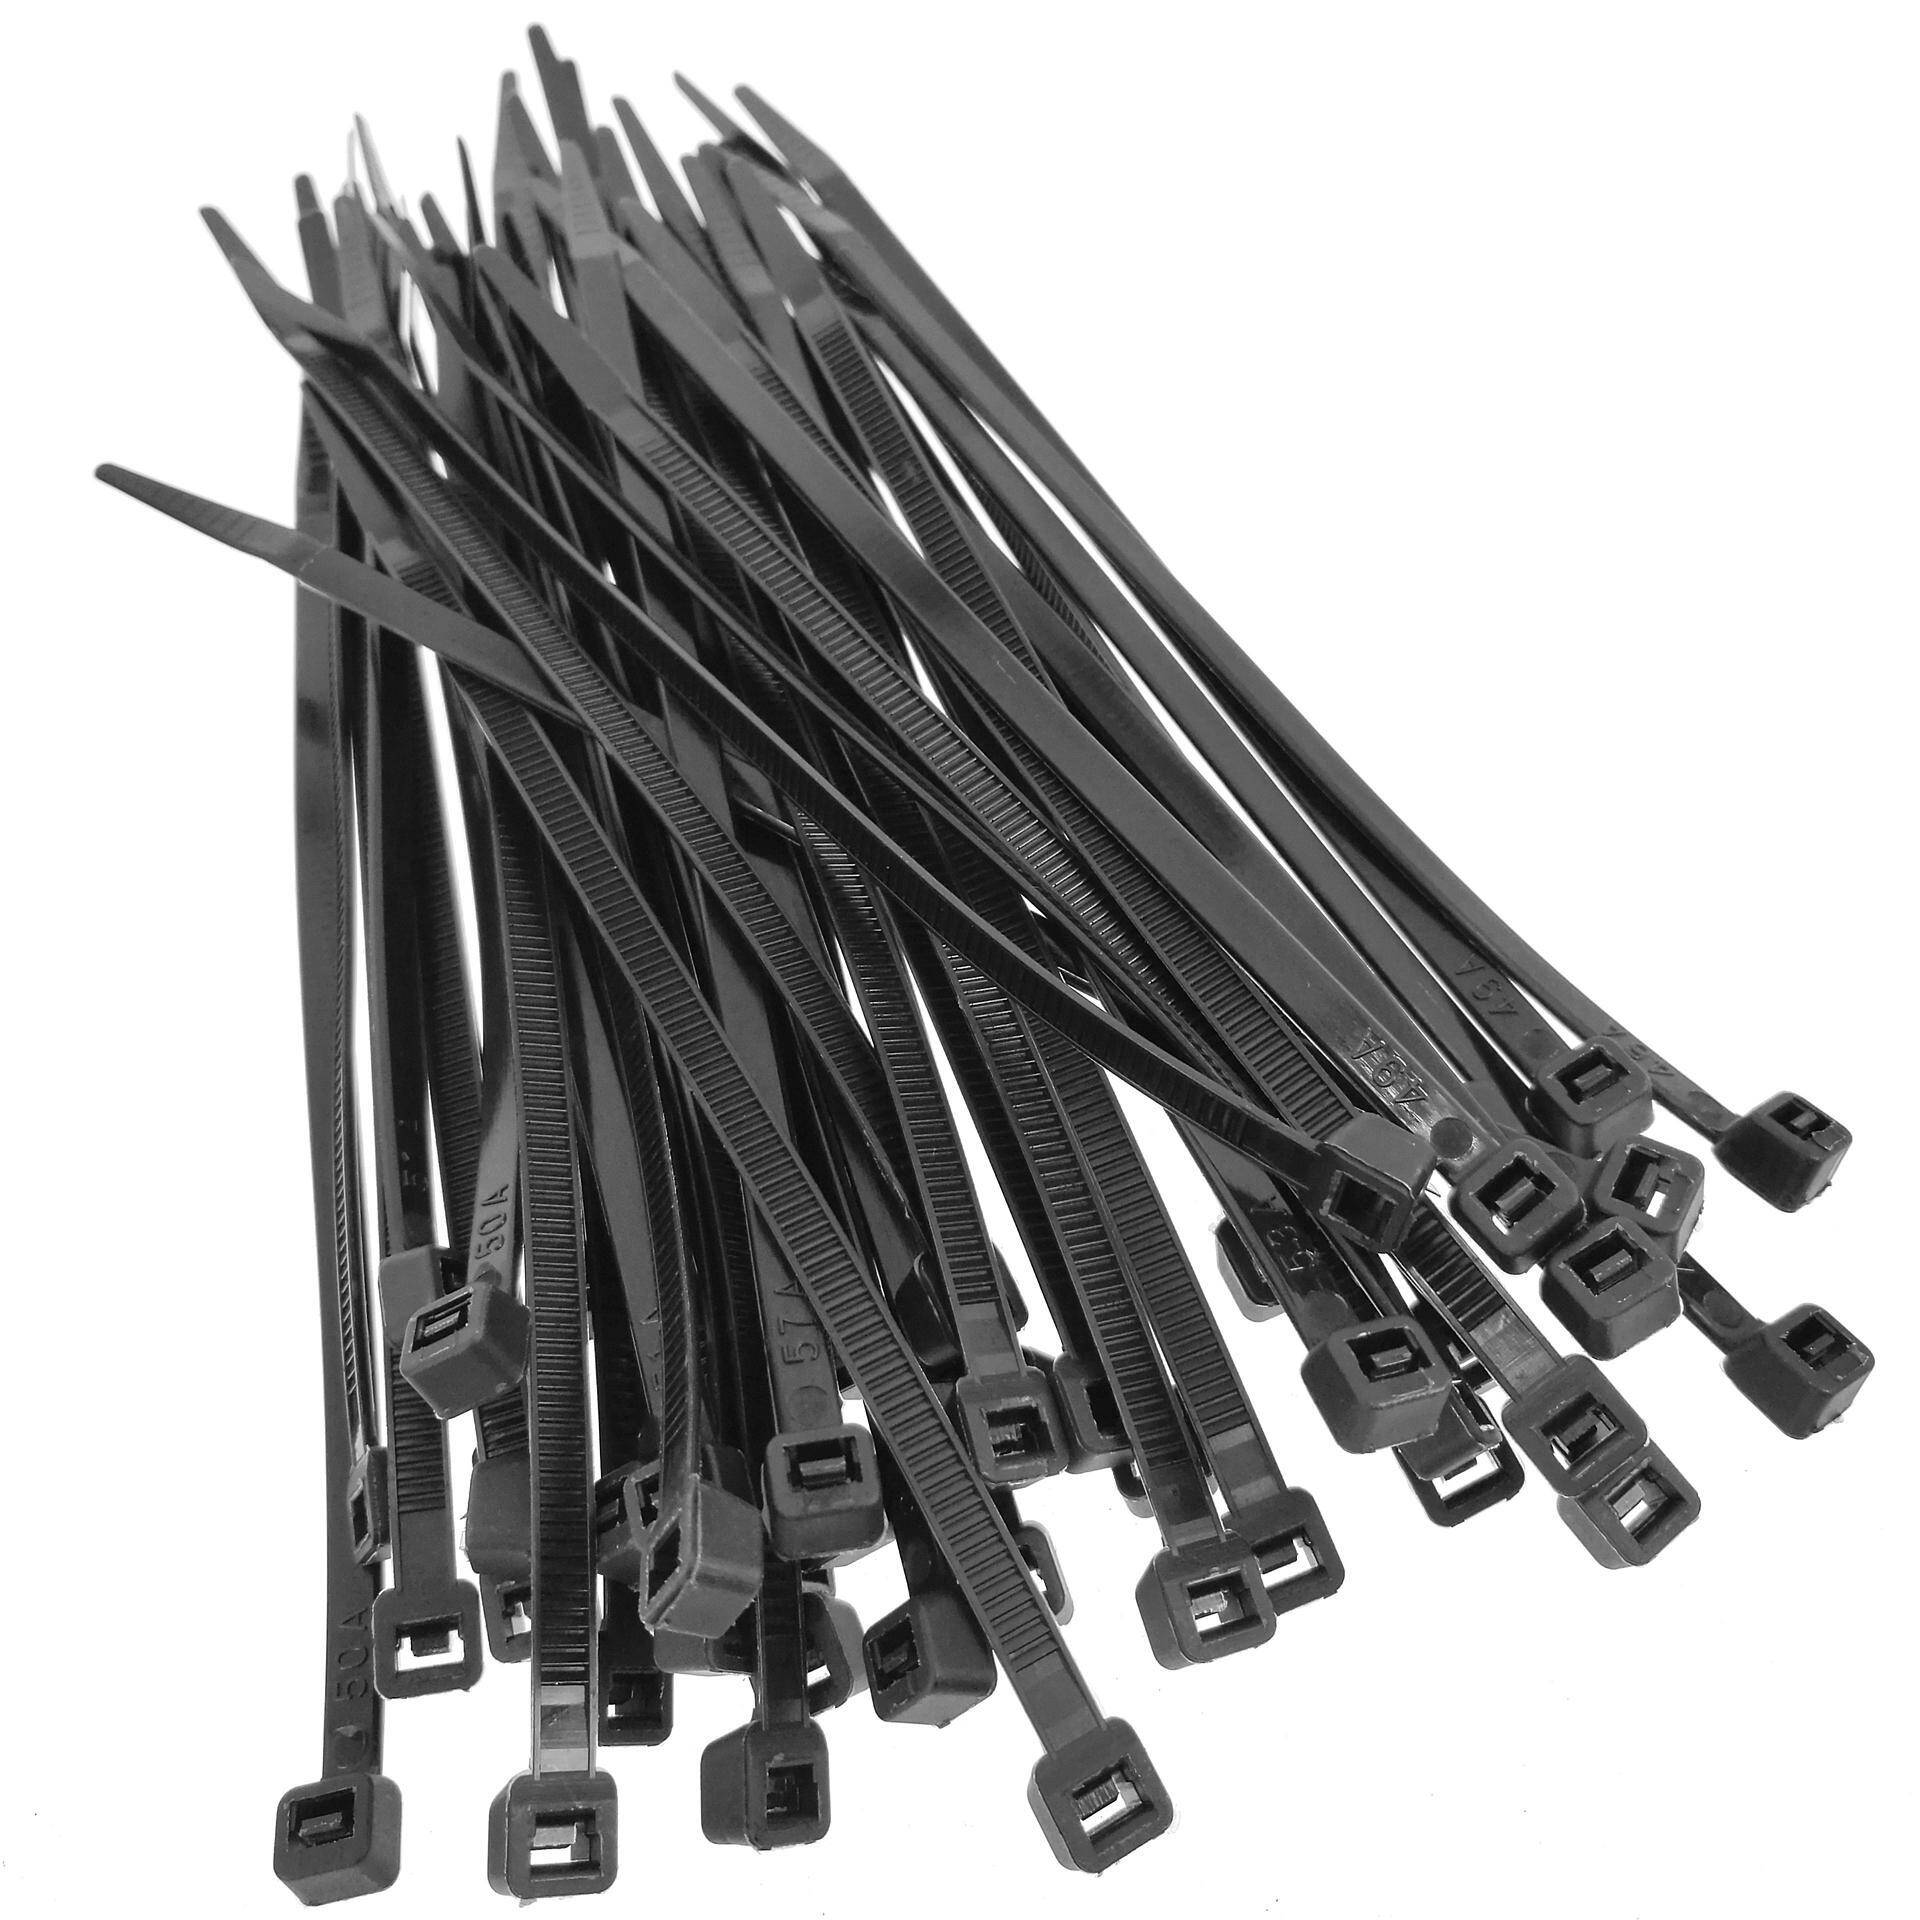 CABLE TIES